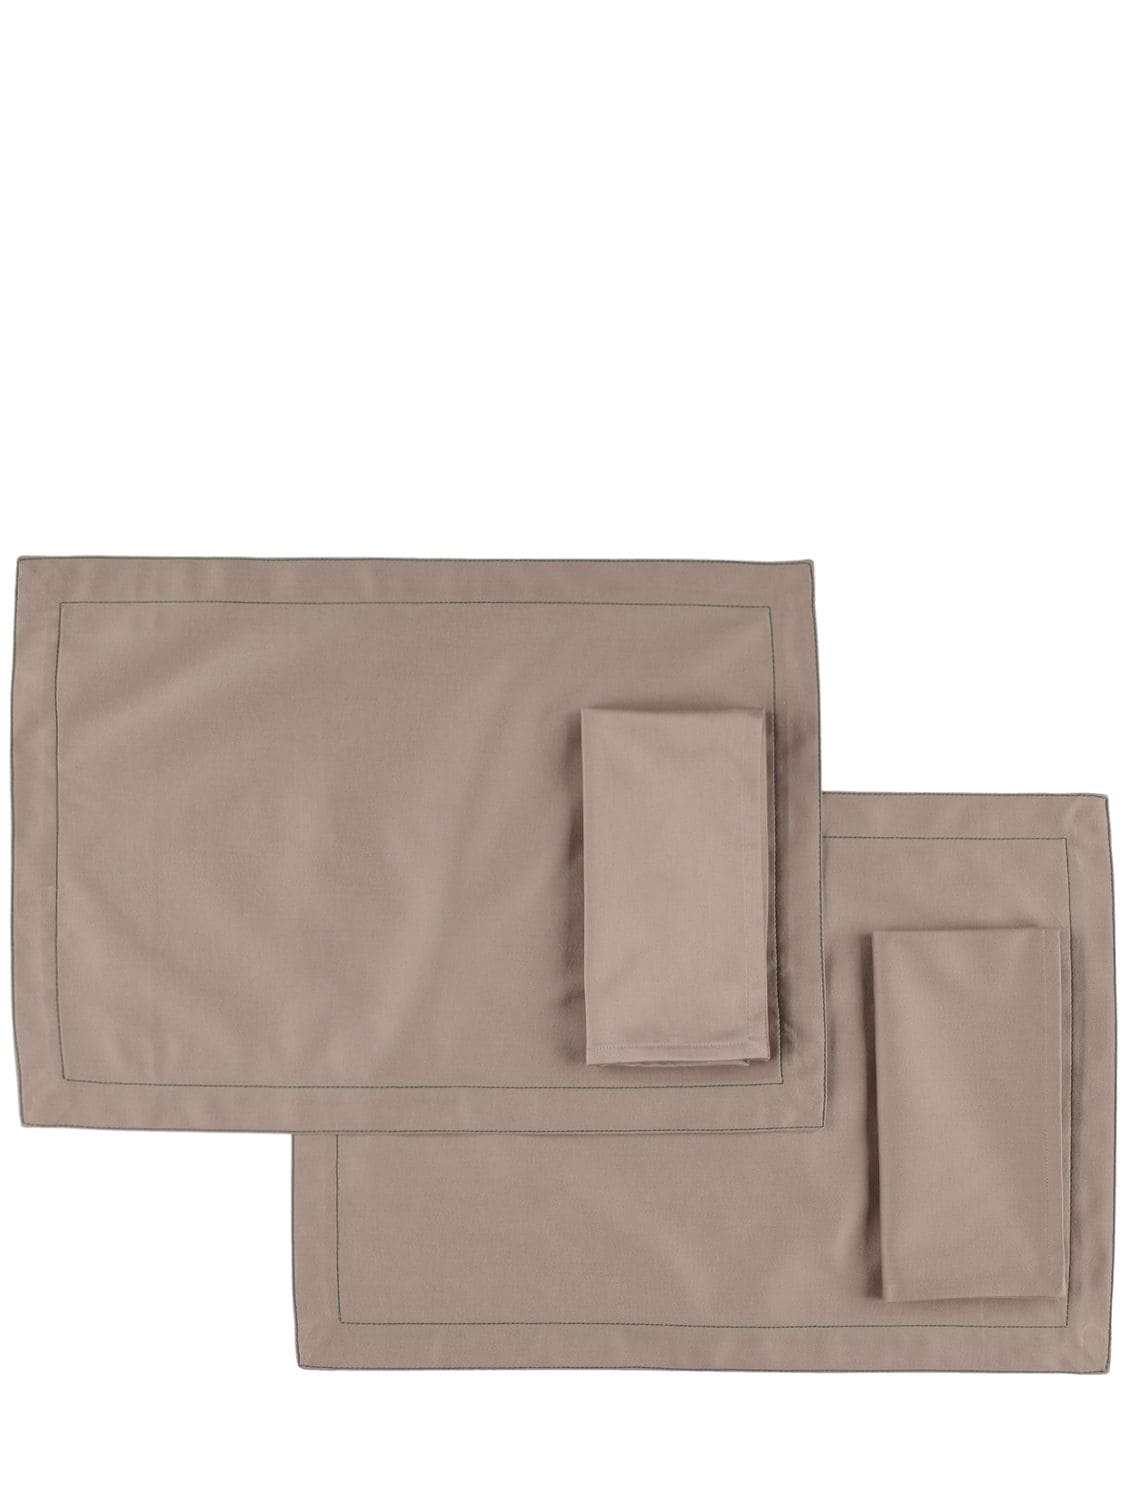 Alessandro Di Marco Set Of 2 Placemats & Napkins In Beige